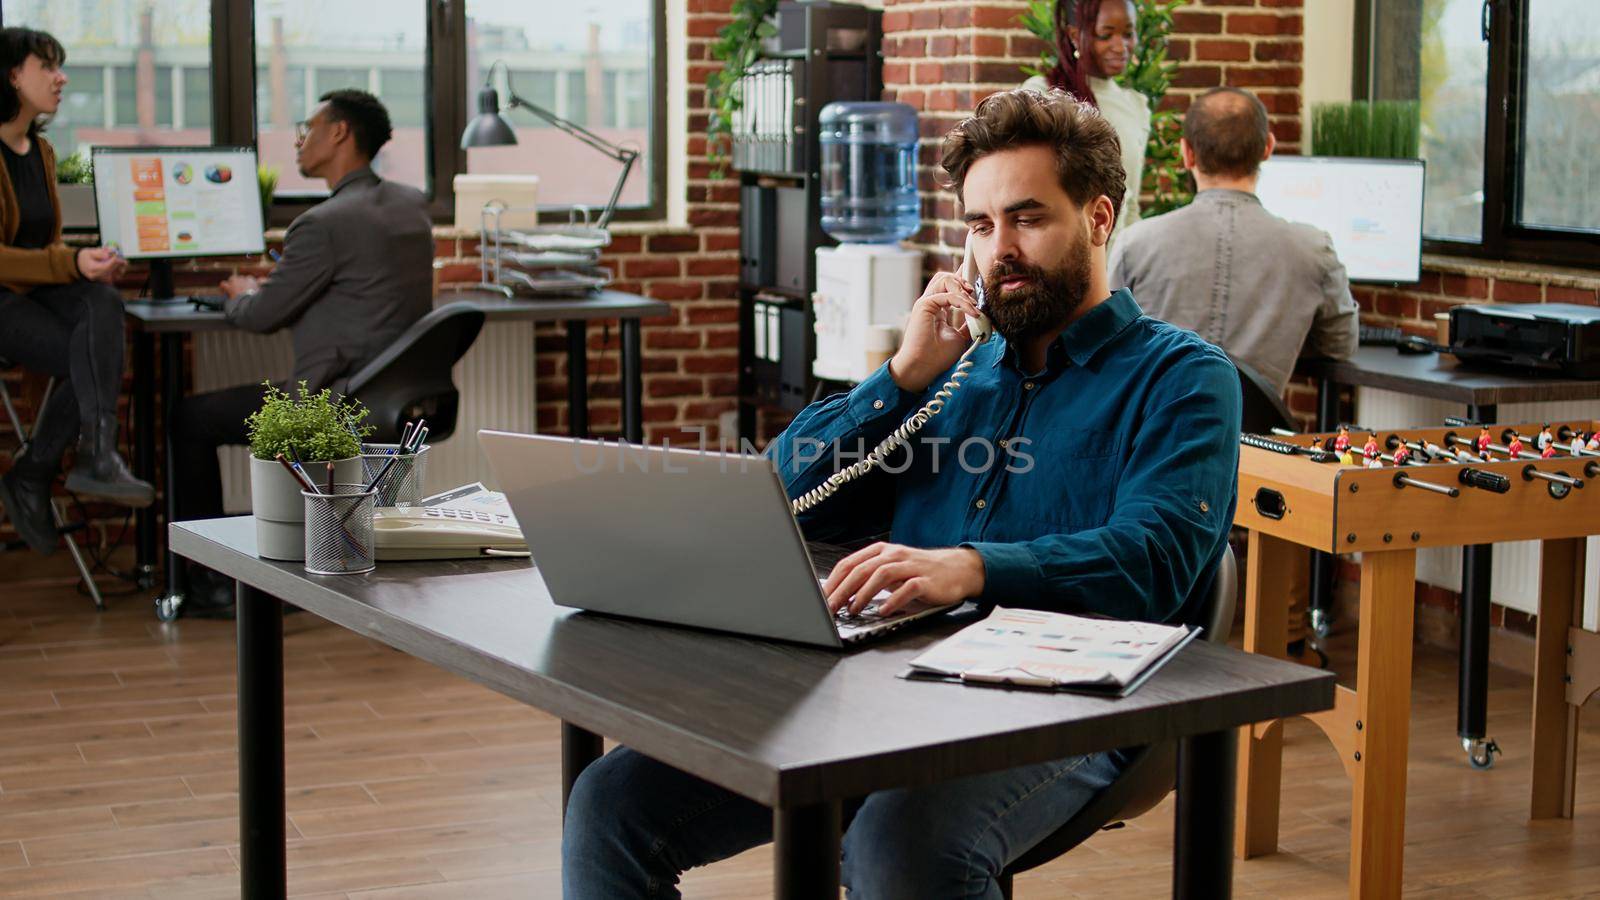 Project manager answering landline phone call in startup office, talking to employee on phone line. Using office telephone with cord to chat and have remote communication at job.